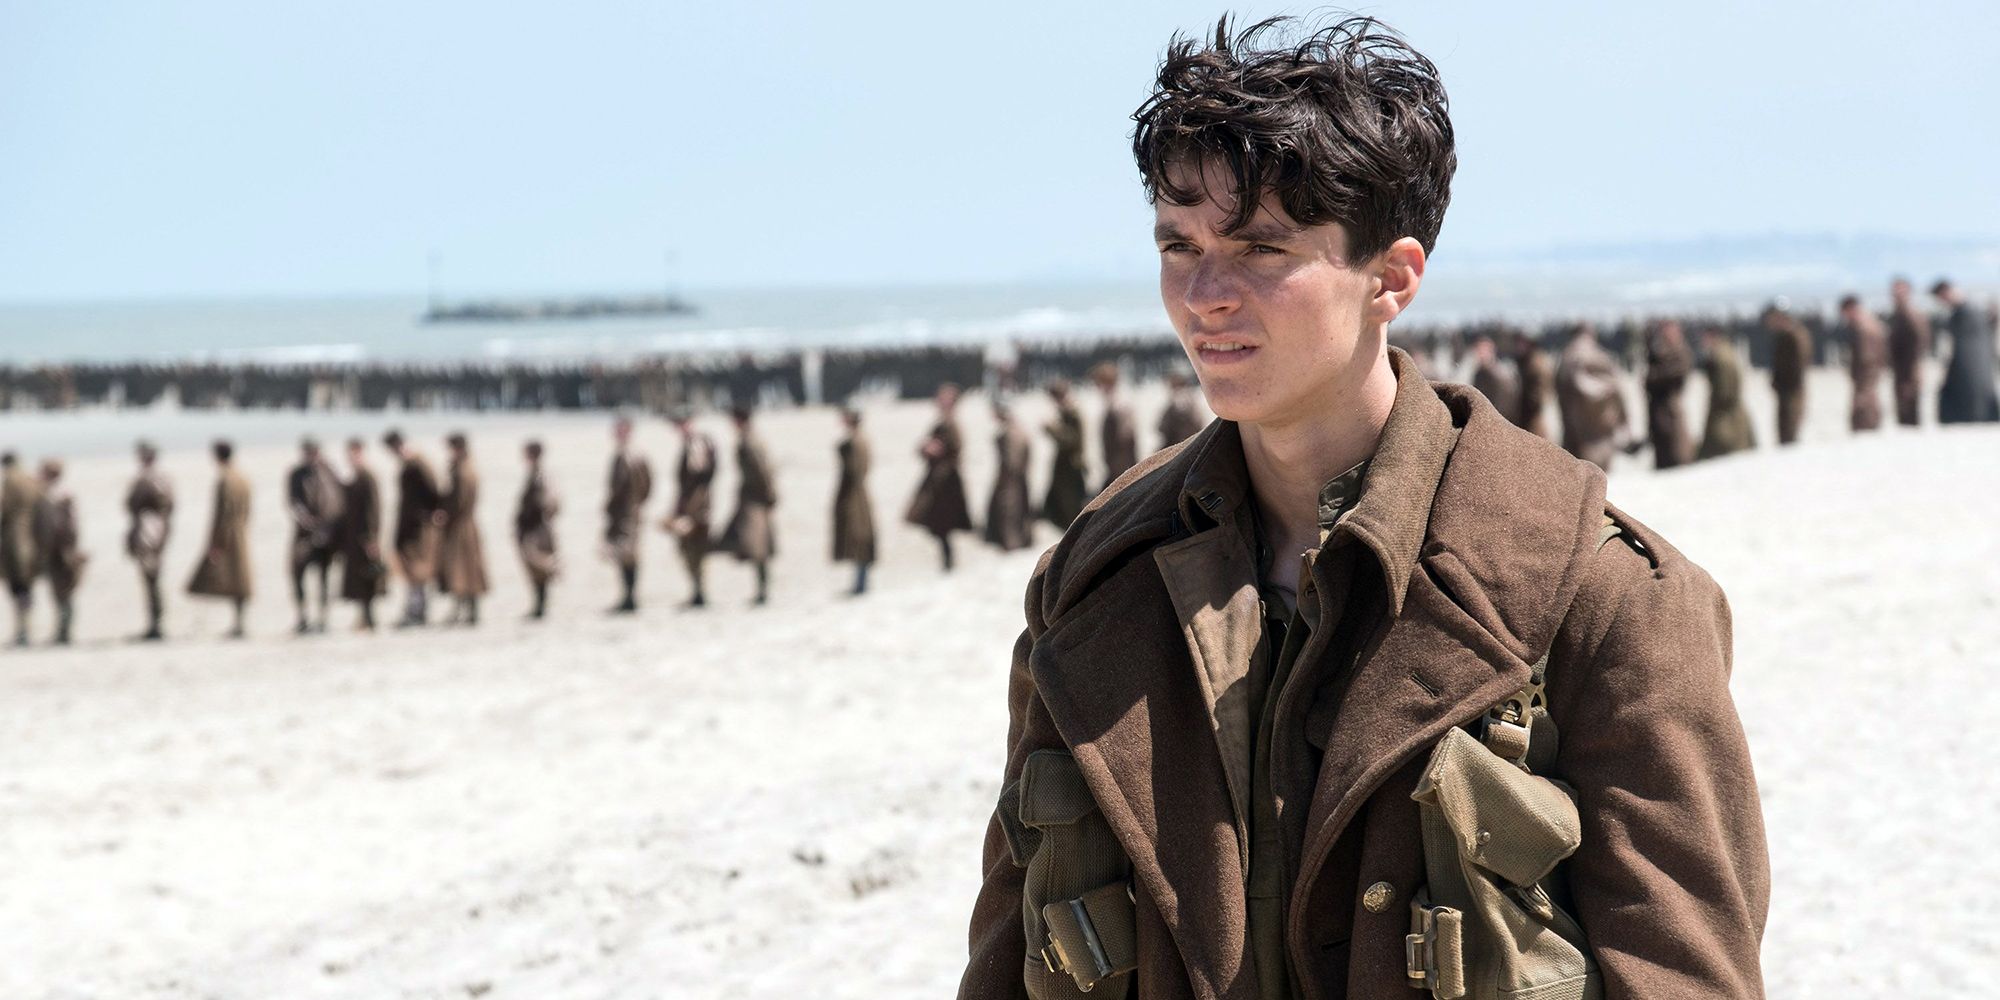 Christopher Nolan's 'Dunkirk' rates pretty highly in terms of historical accuracy